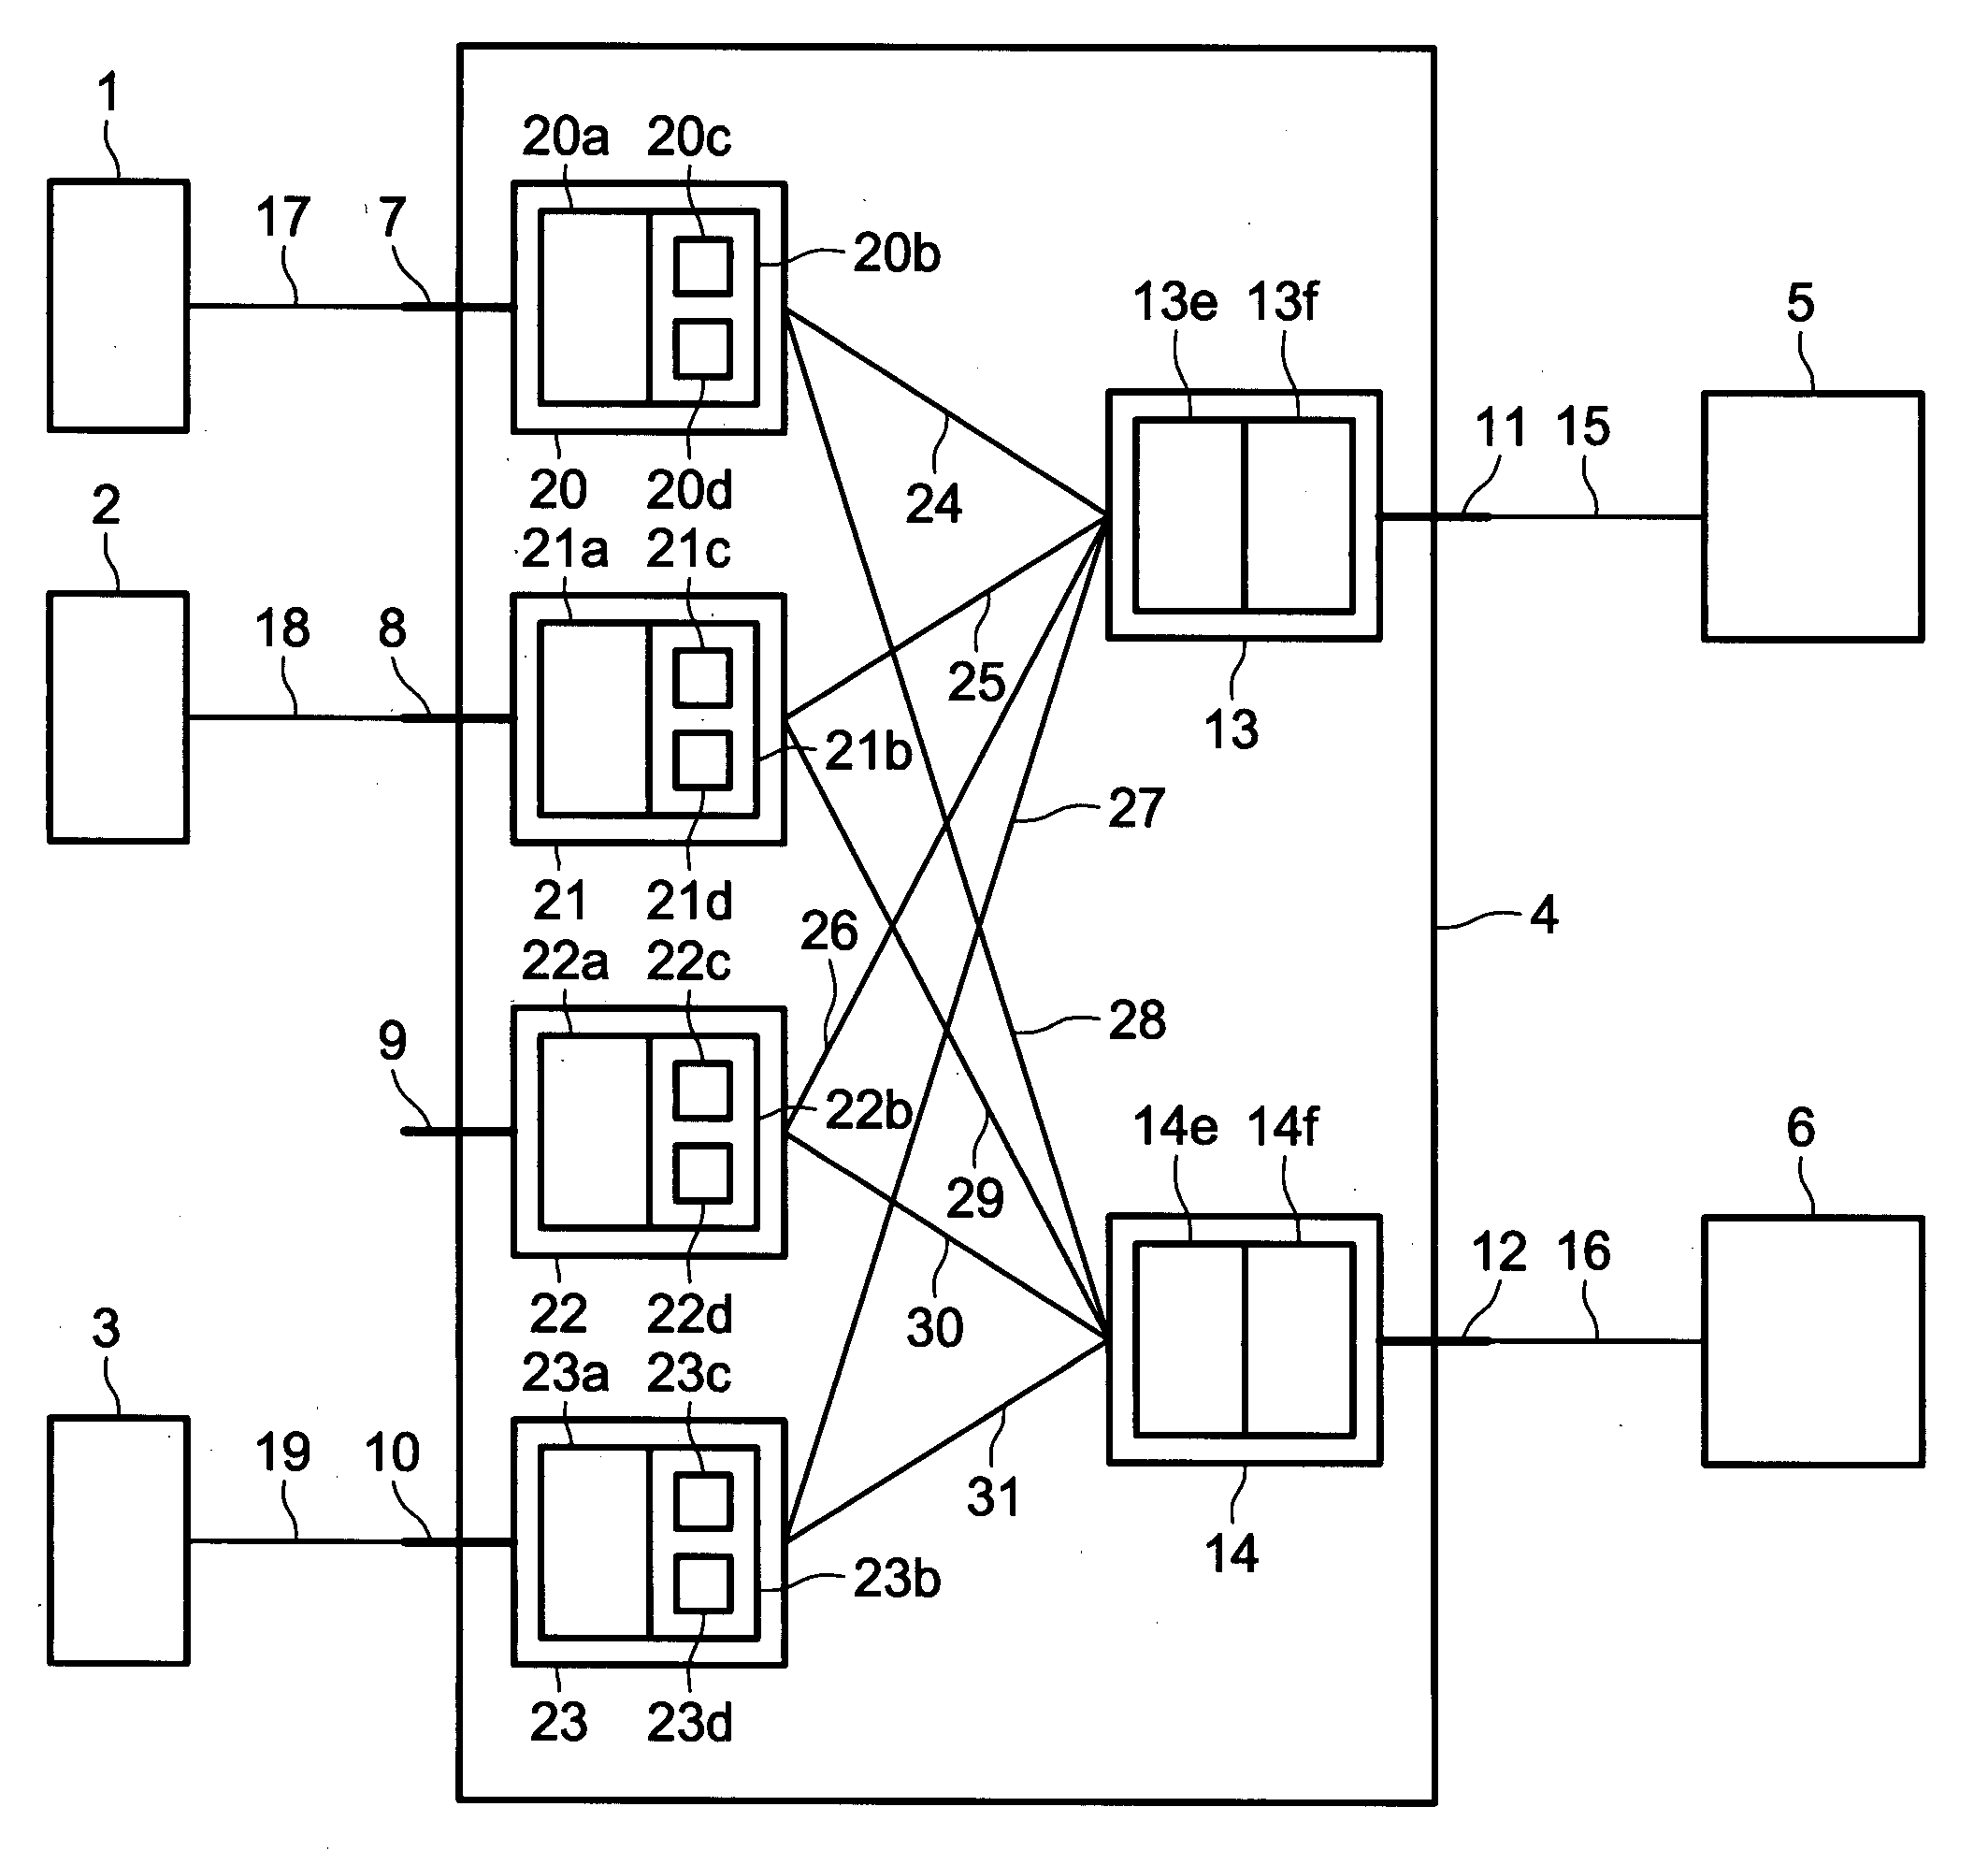 Method and system for transmitting messages in an interconnection network